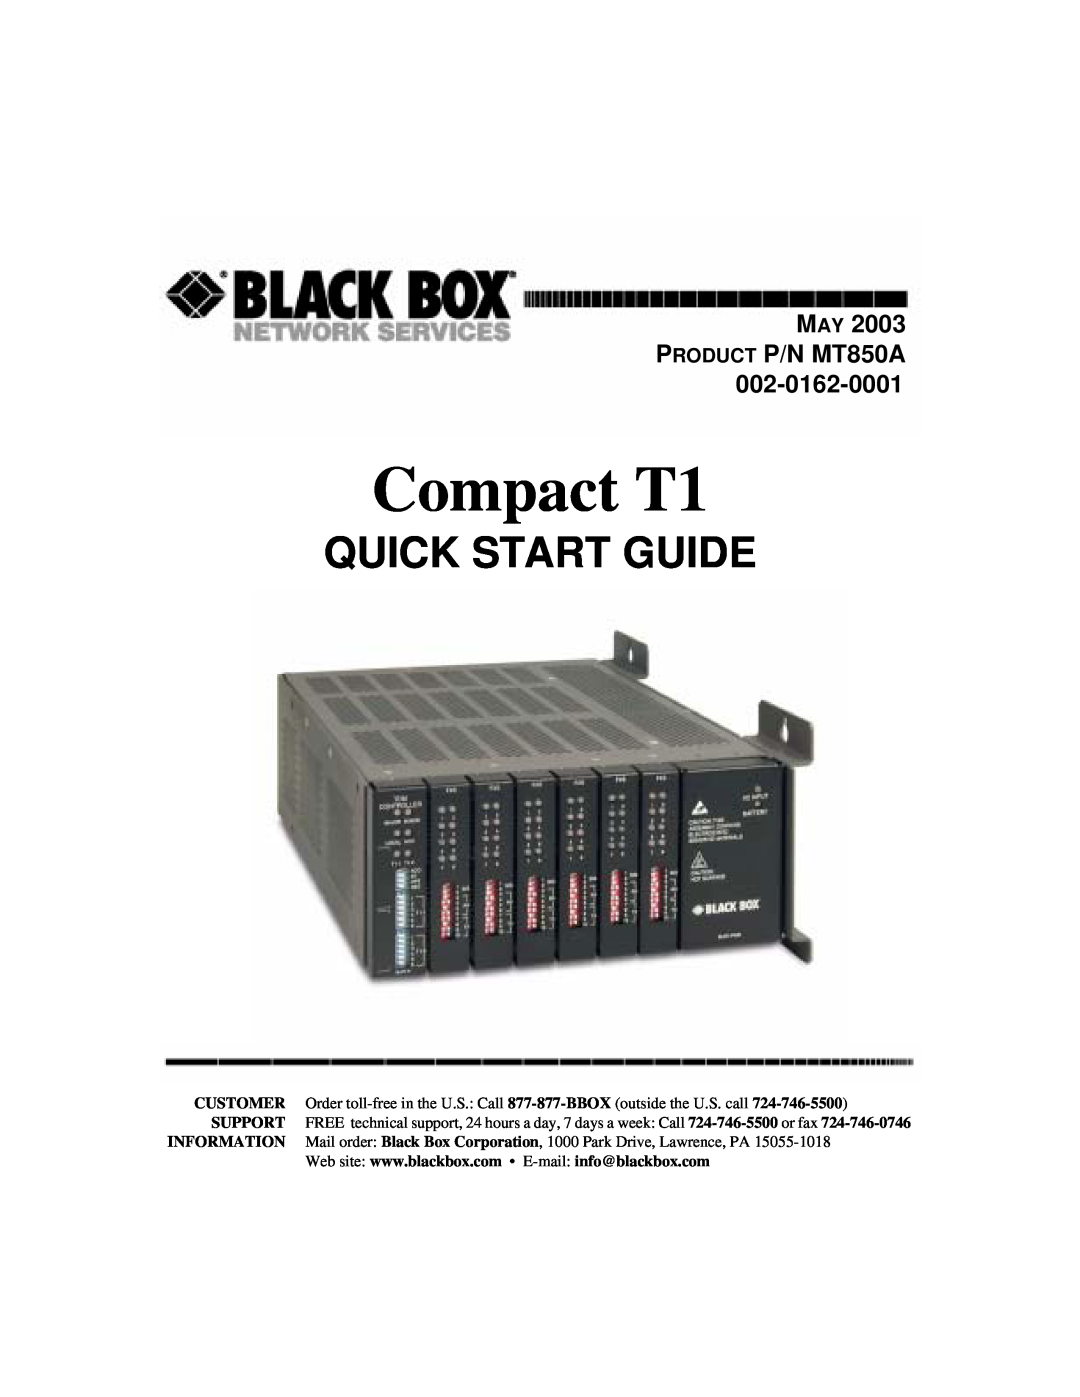 Black Box COMPACT T1 quick start Compact T1, Quick Start Guide, MAY PRODUCT P/N MT850A 002-0162-0001 